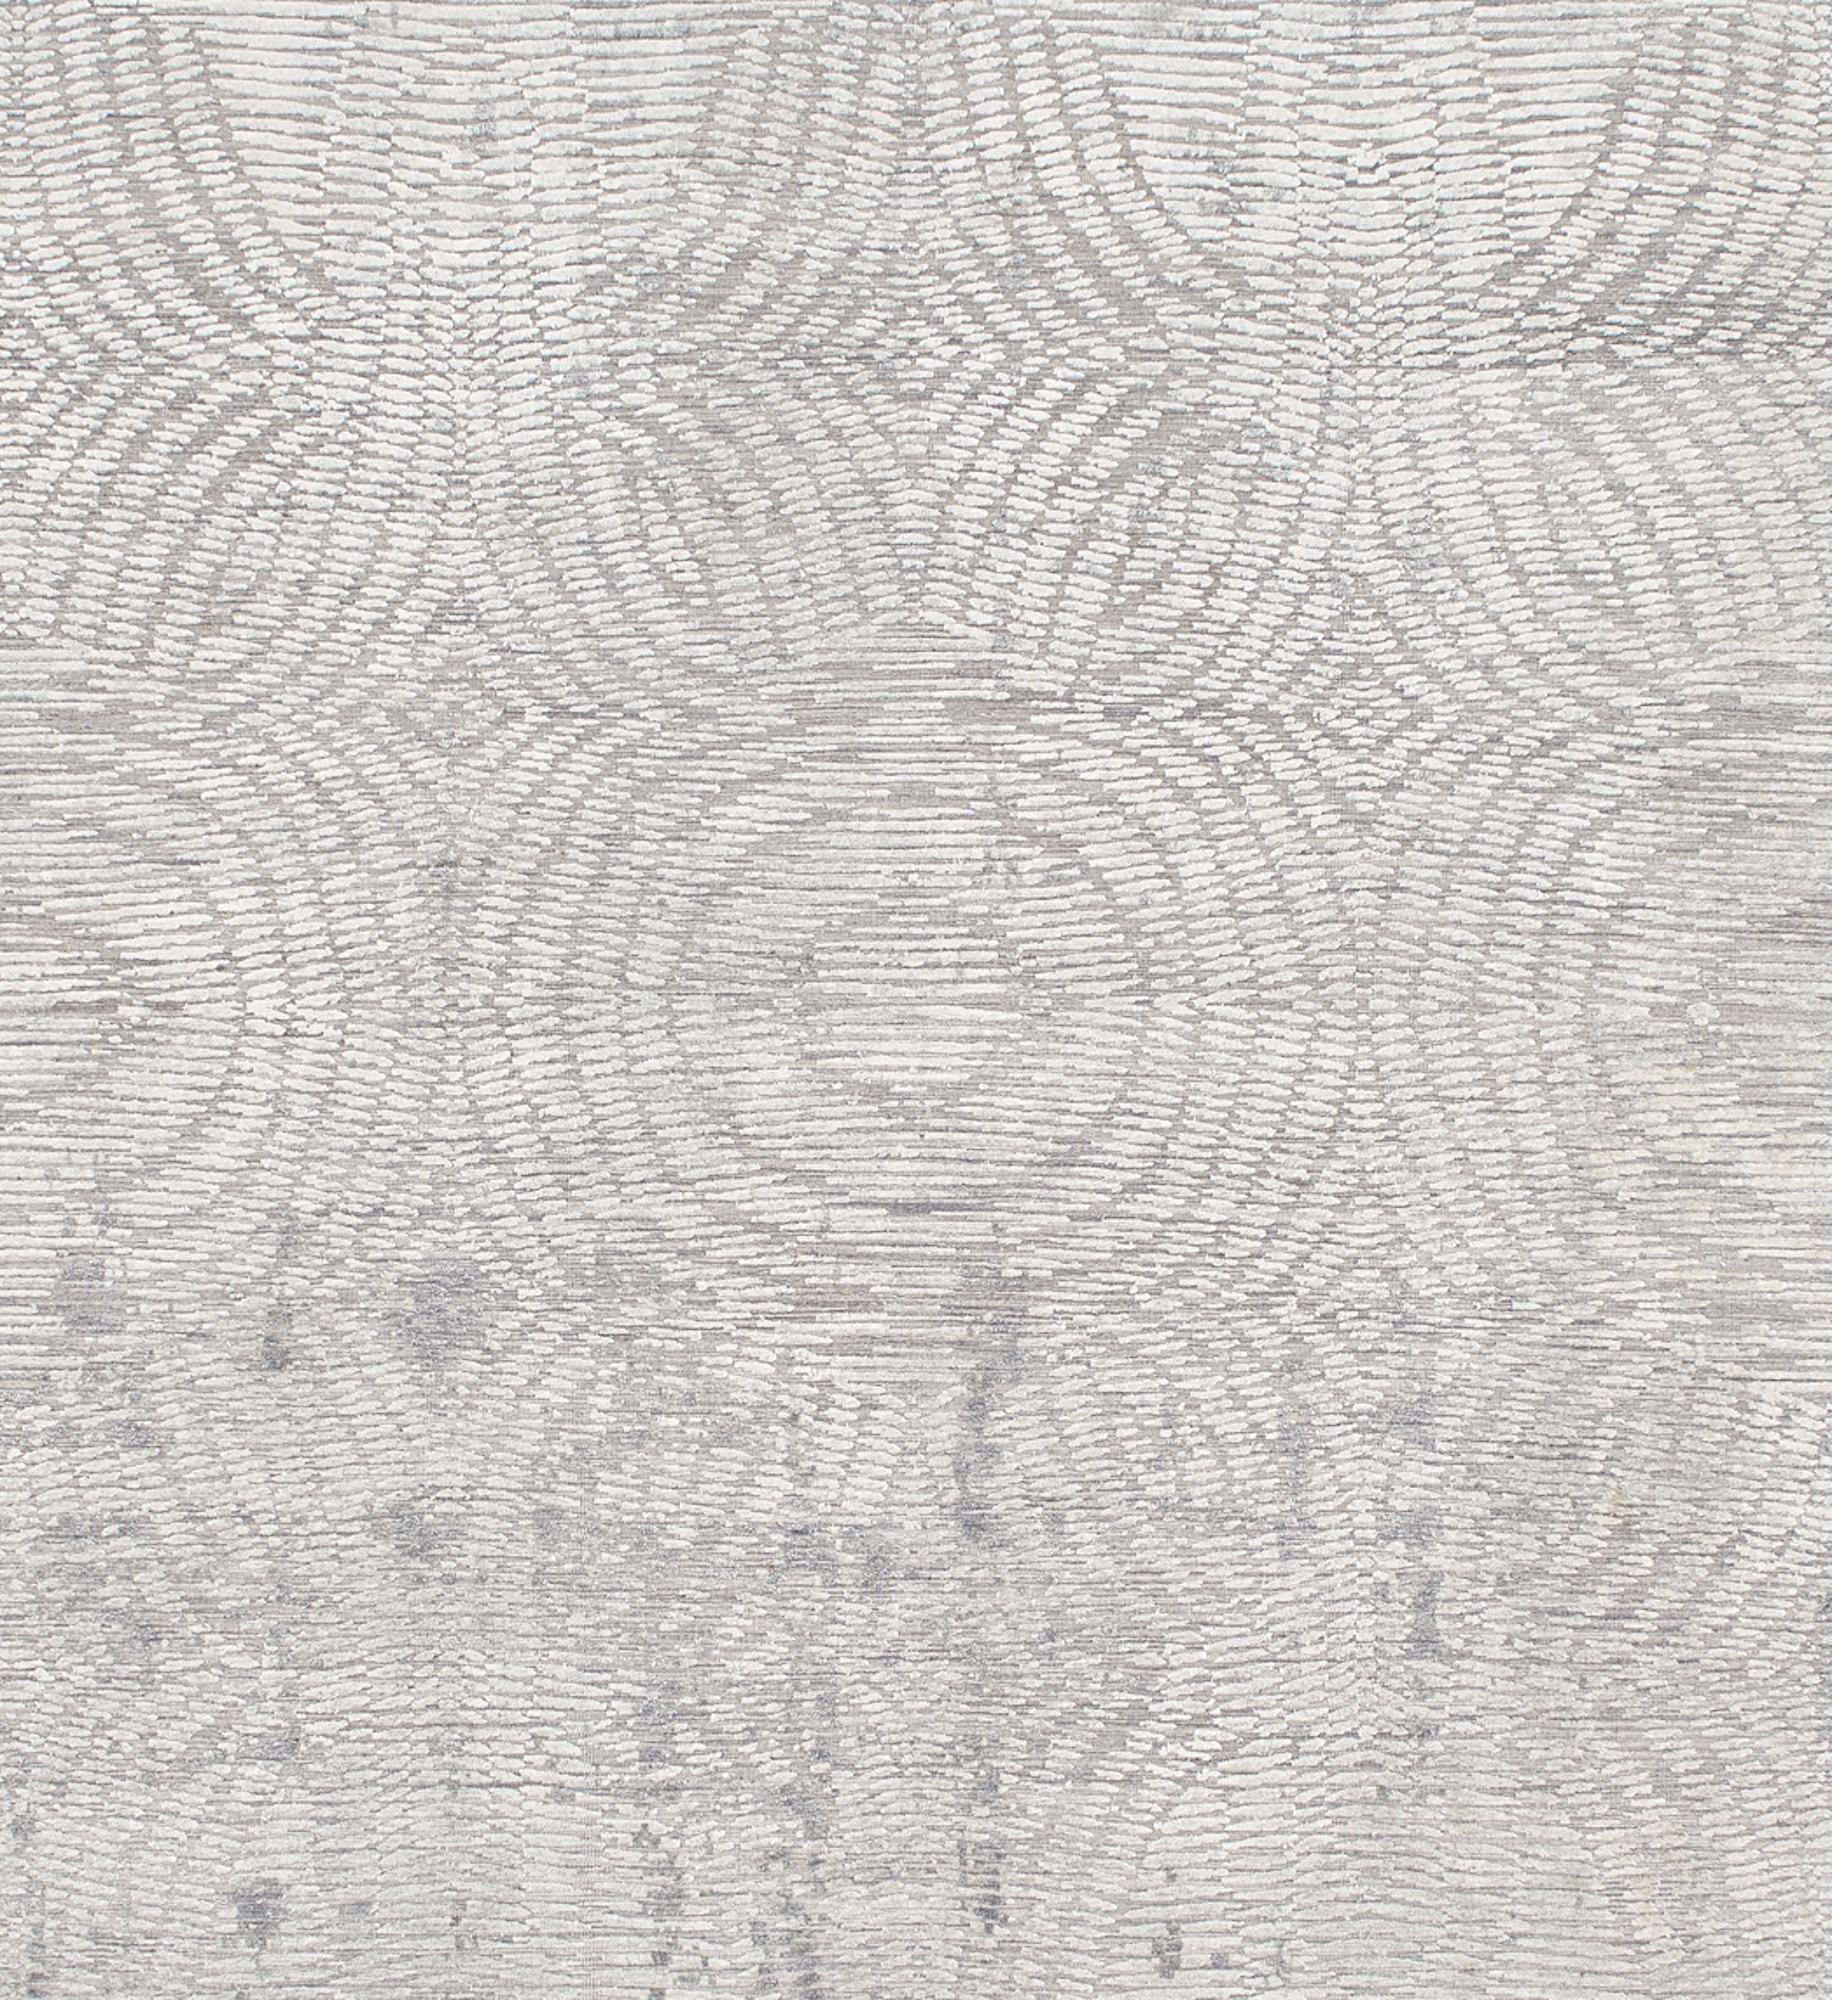 Named for the optical art movement that inspired it, this is a fabulous collection of dynamic, textural patterns in a sophisticated range of understated tones.

Rugs and Floor Coverings:

Rug Pattern: Vega
Dimensions: 9' x 12'
Fiber Content: